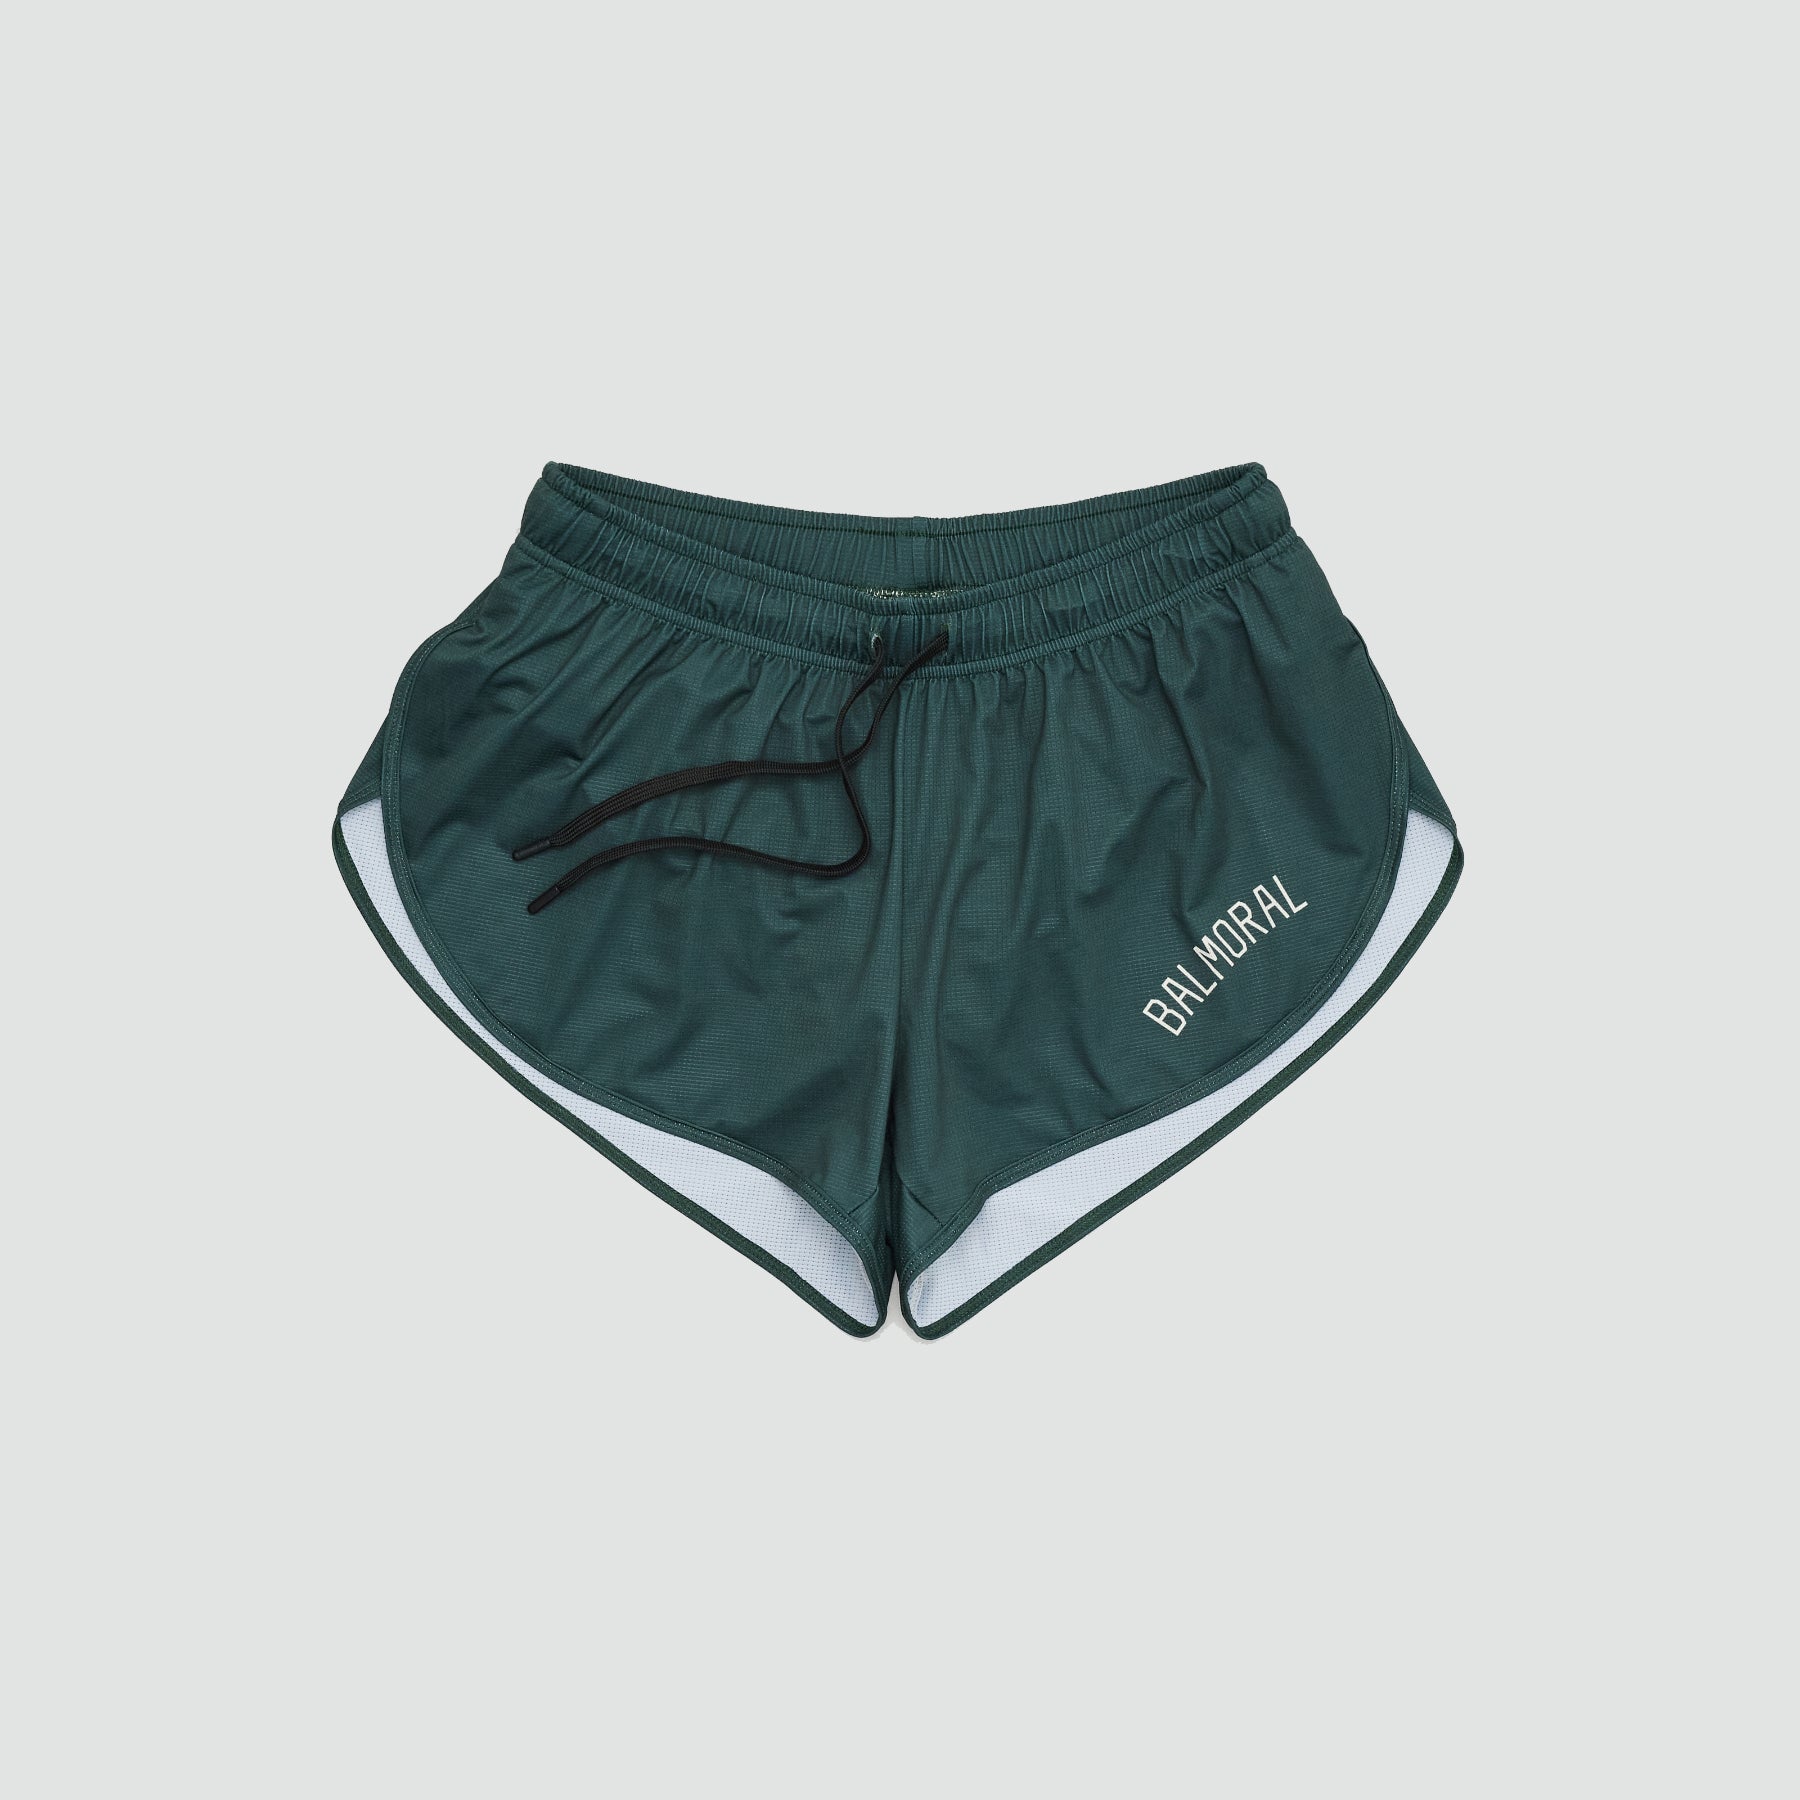 Tornhill Shorts - Forest Green